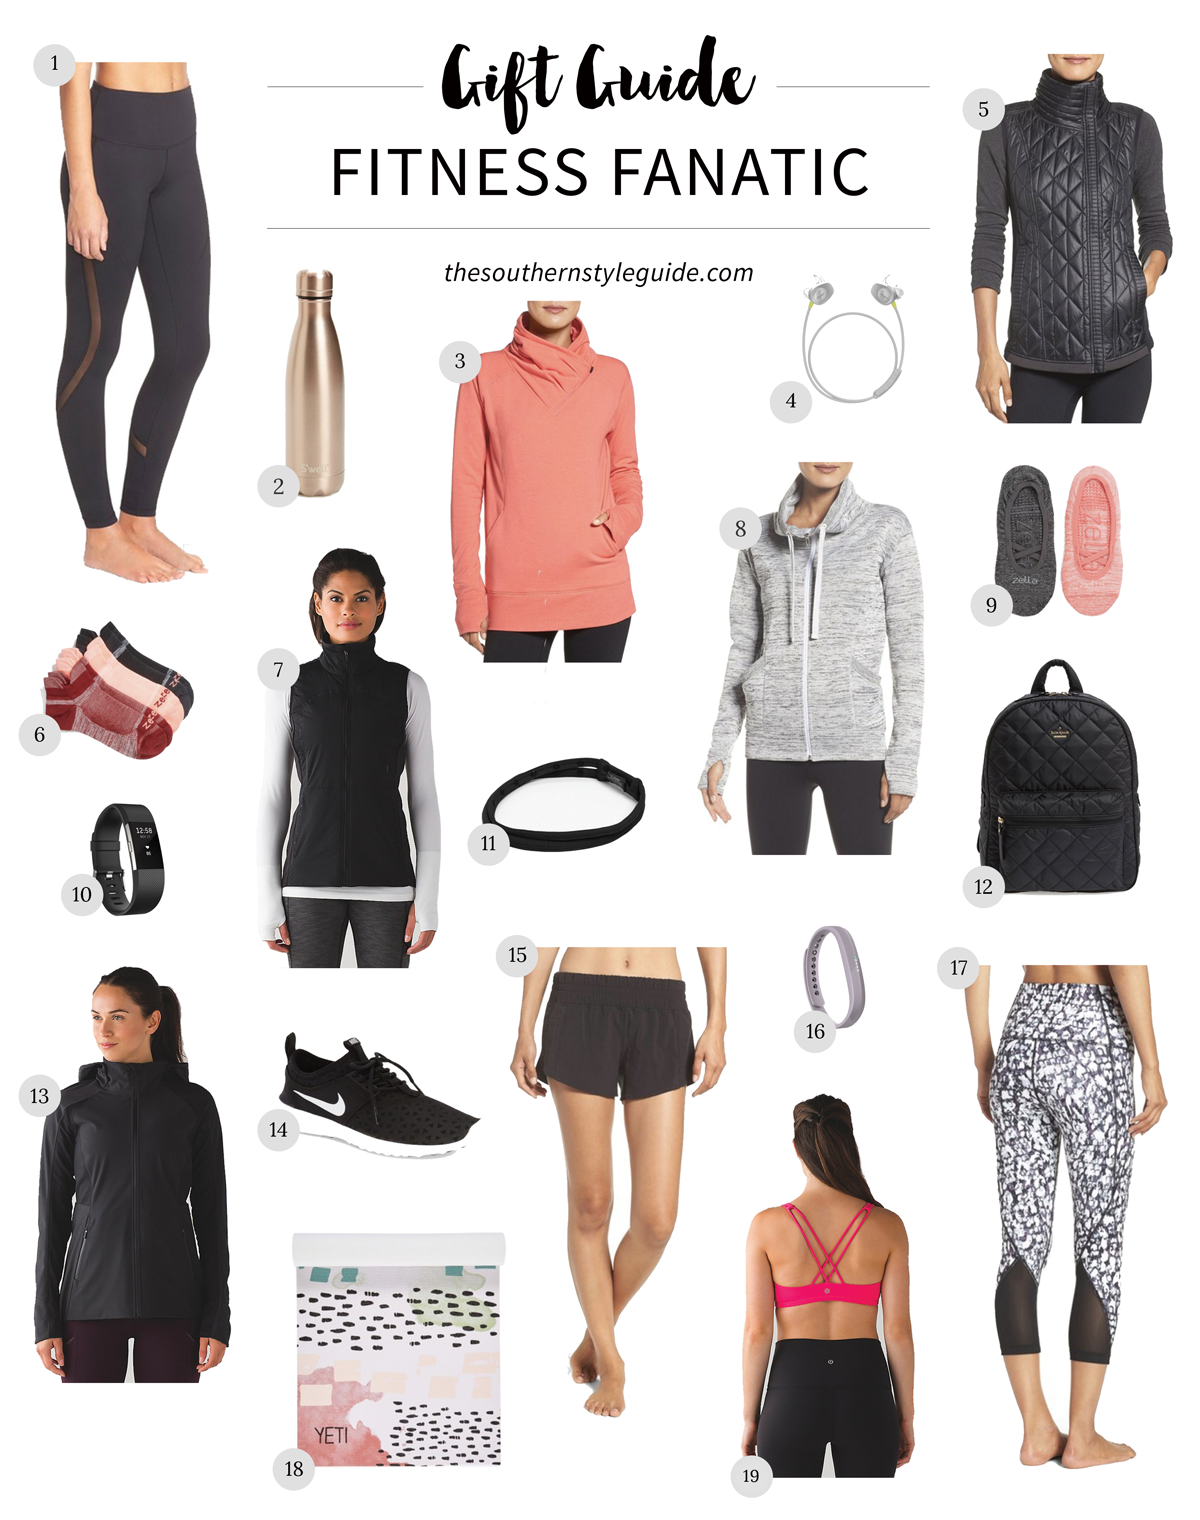 fitness gifts, gift guide, christmas gifts, christmas gift guide, workout apparel, cute workout clothes, fitness accessories, gym bag, in-ear earphones, pull-overs, lululemon workout clothes